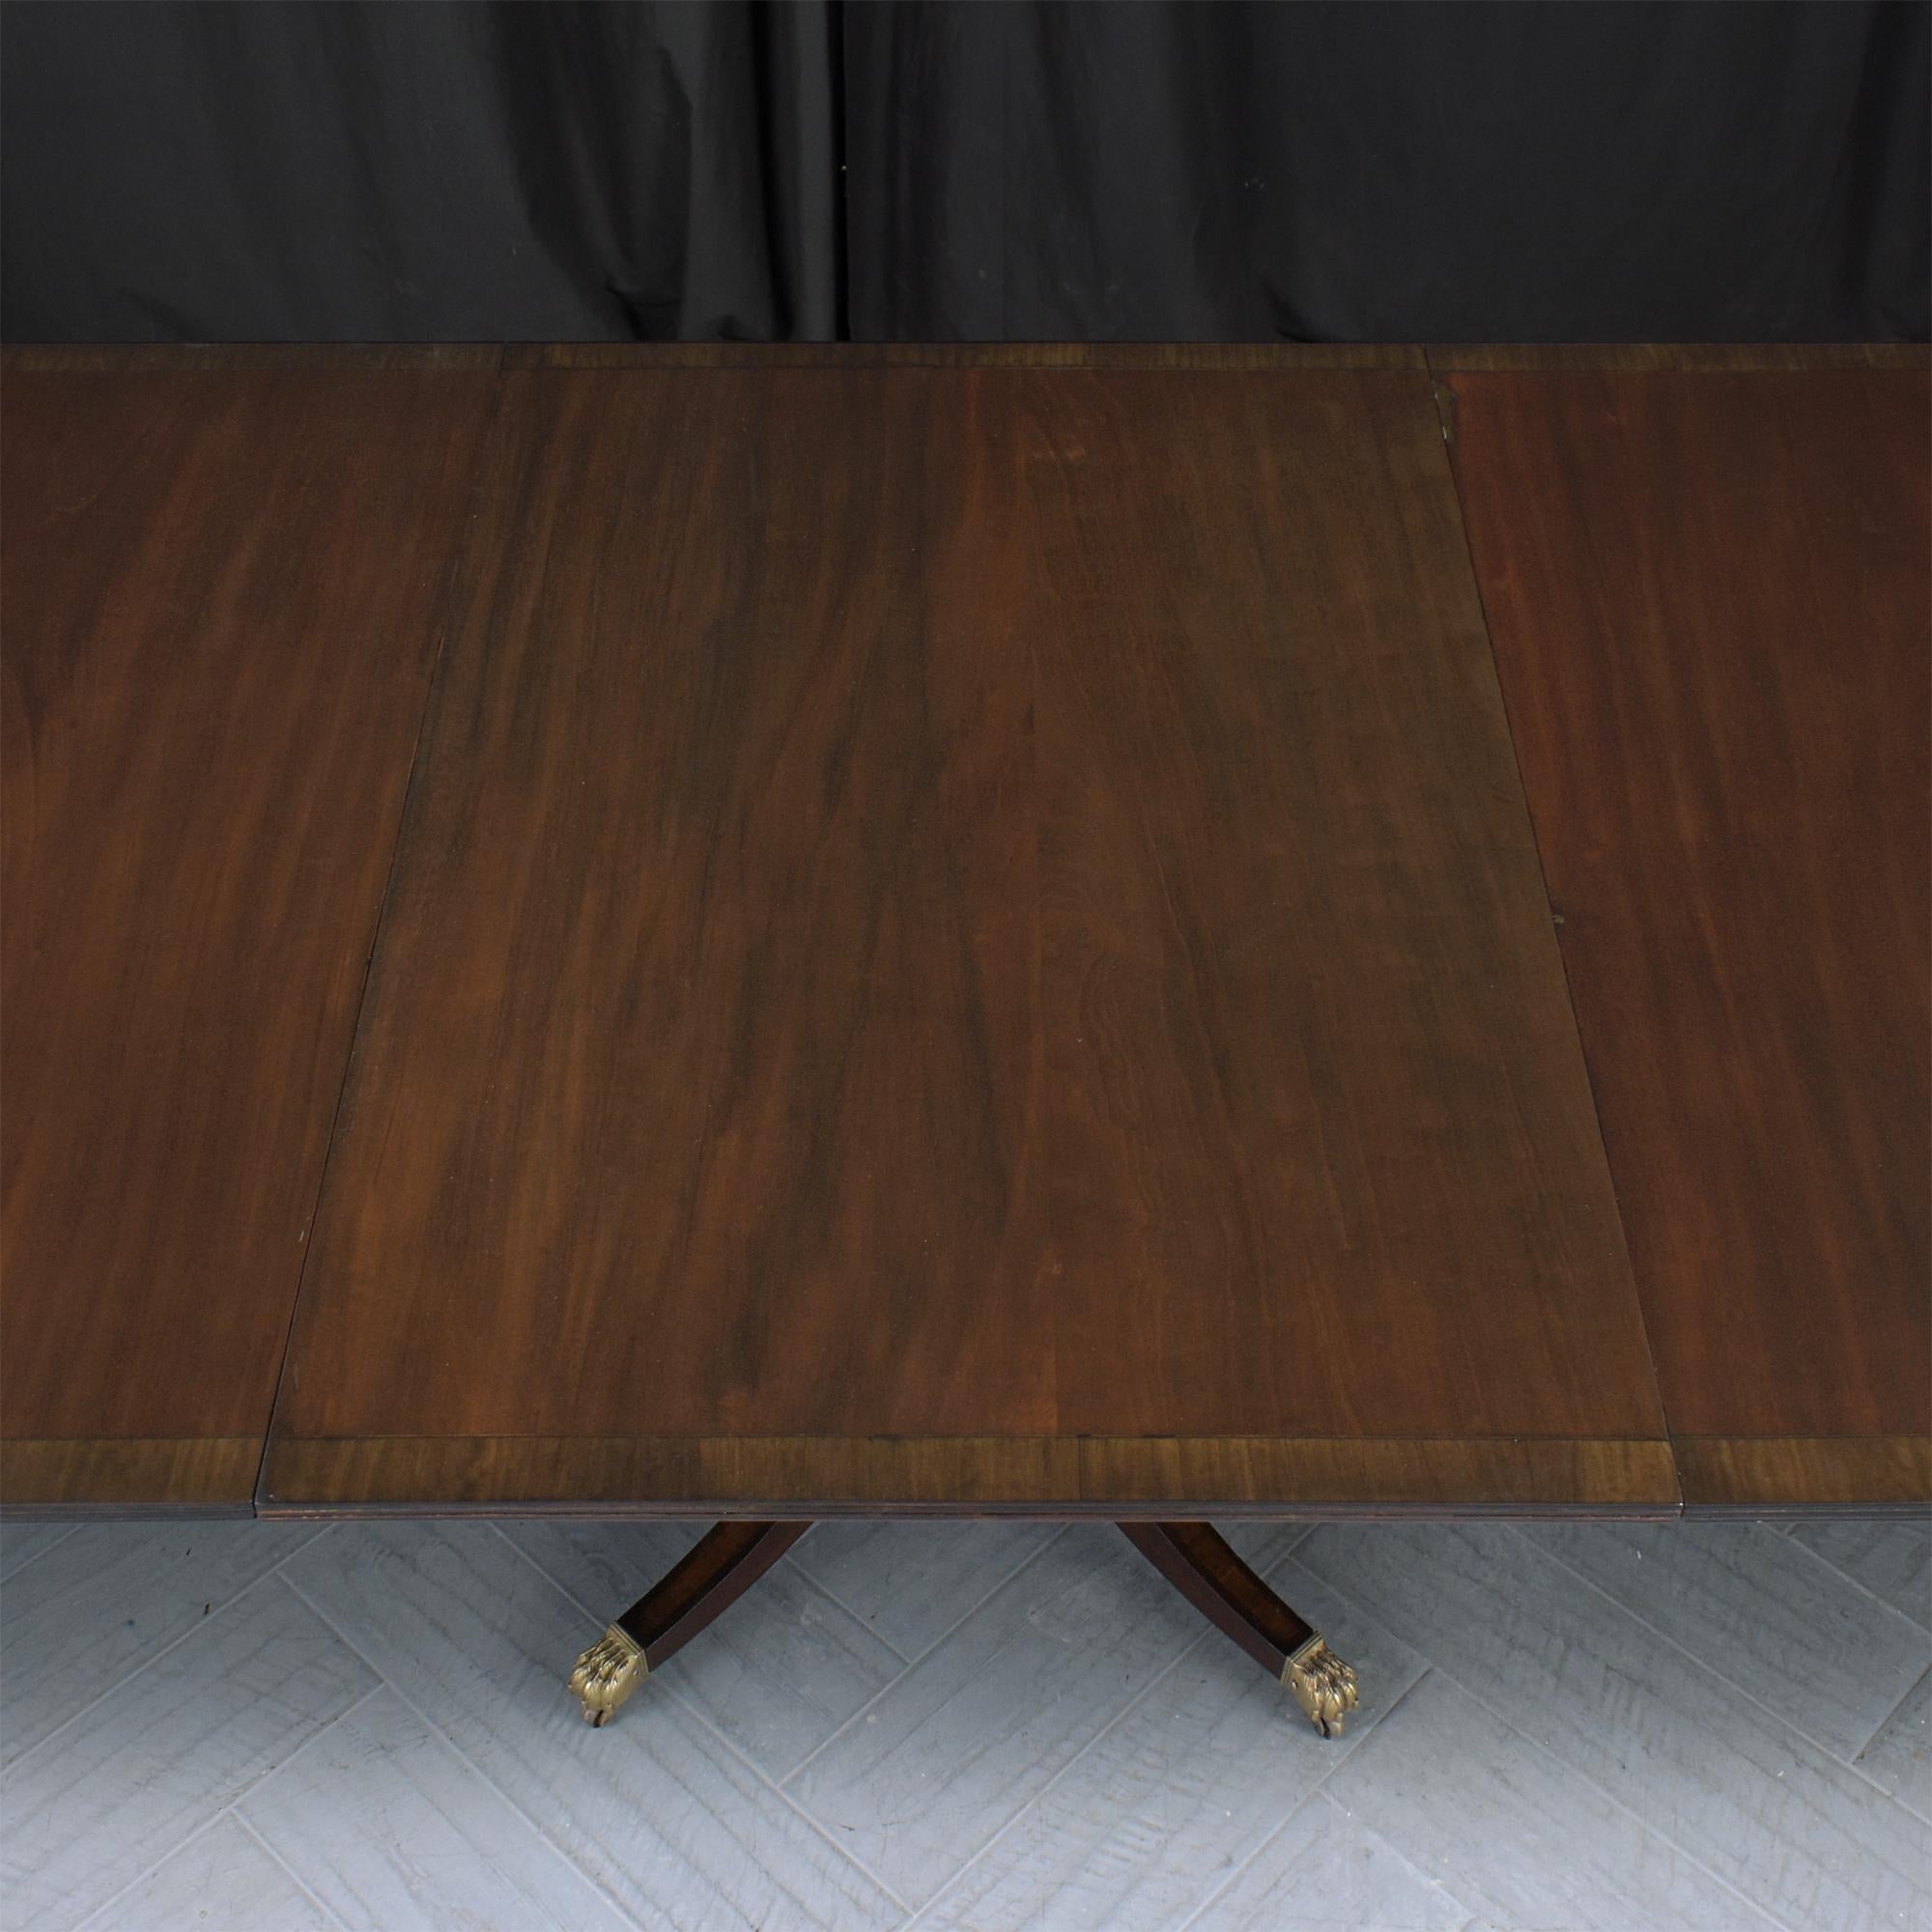 19th Century Restored 1890s George III Mahogany Dining Table with Extendable Leaves For Sale